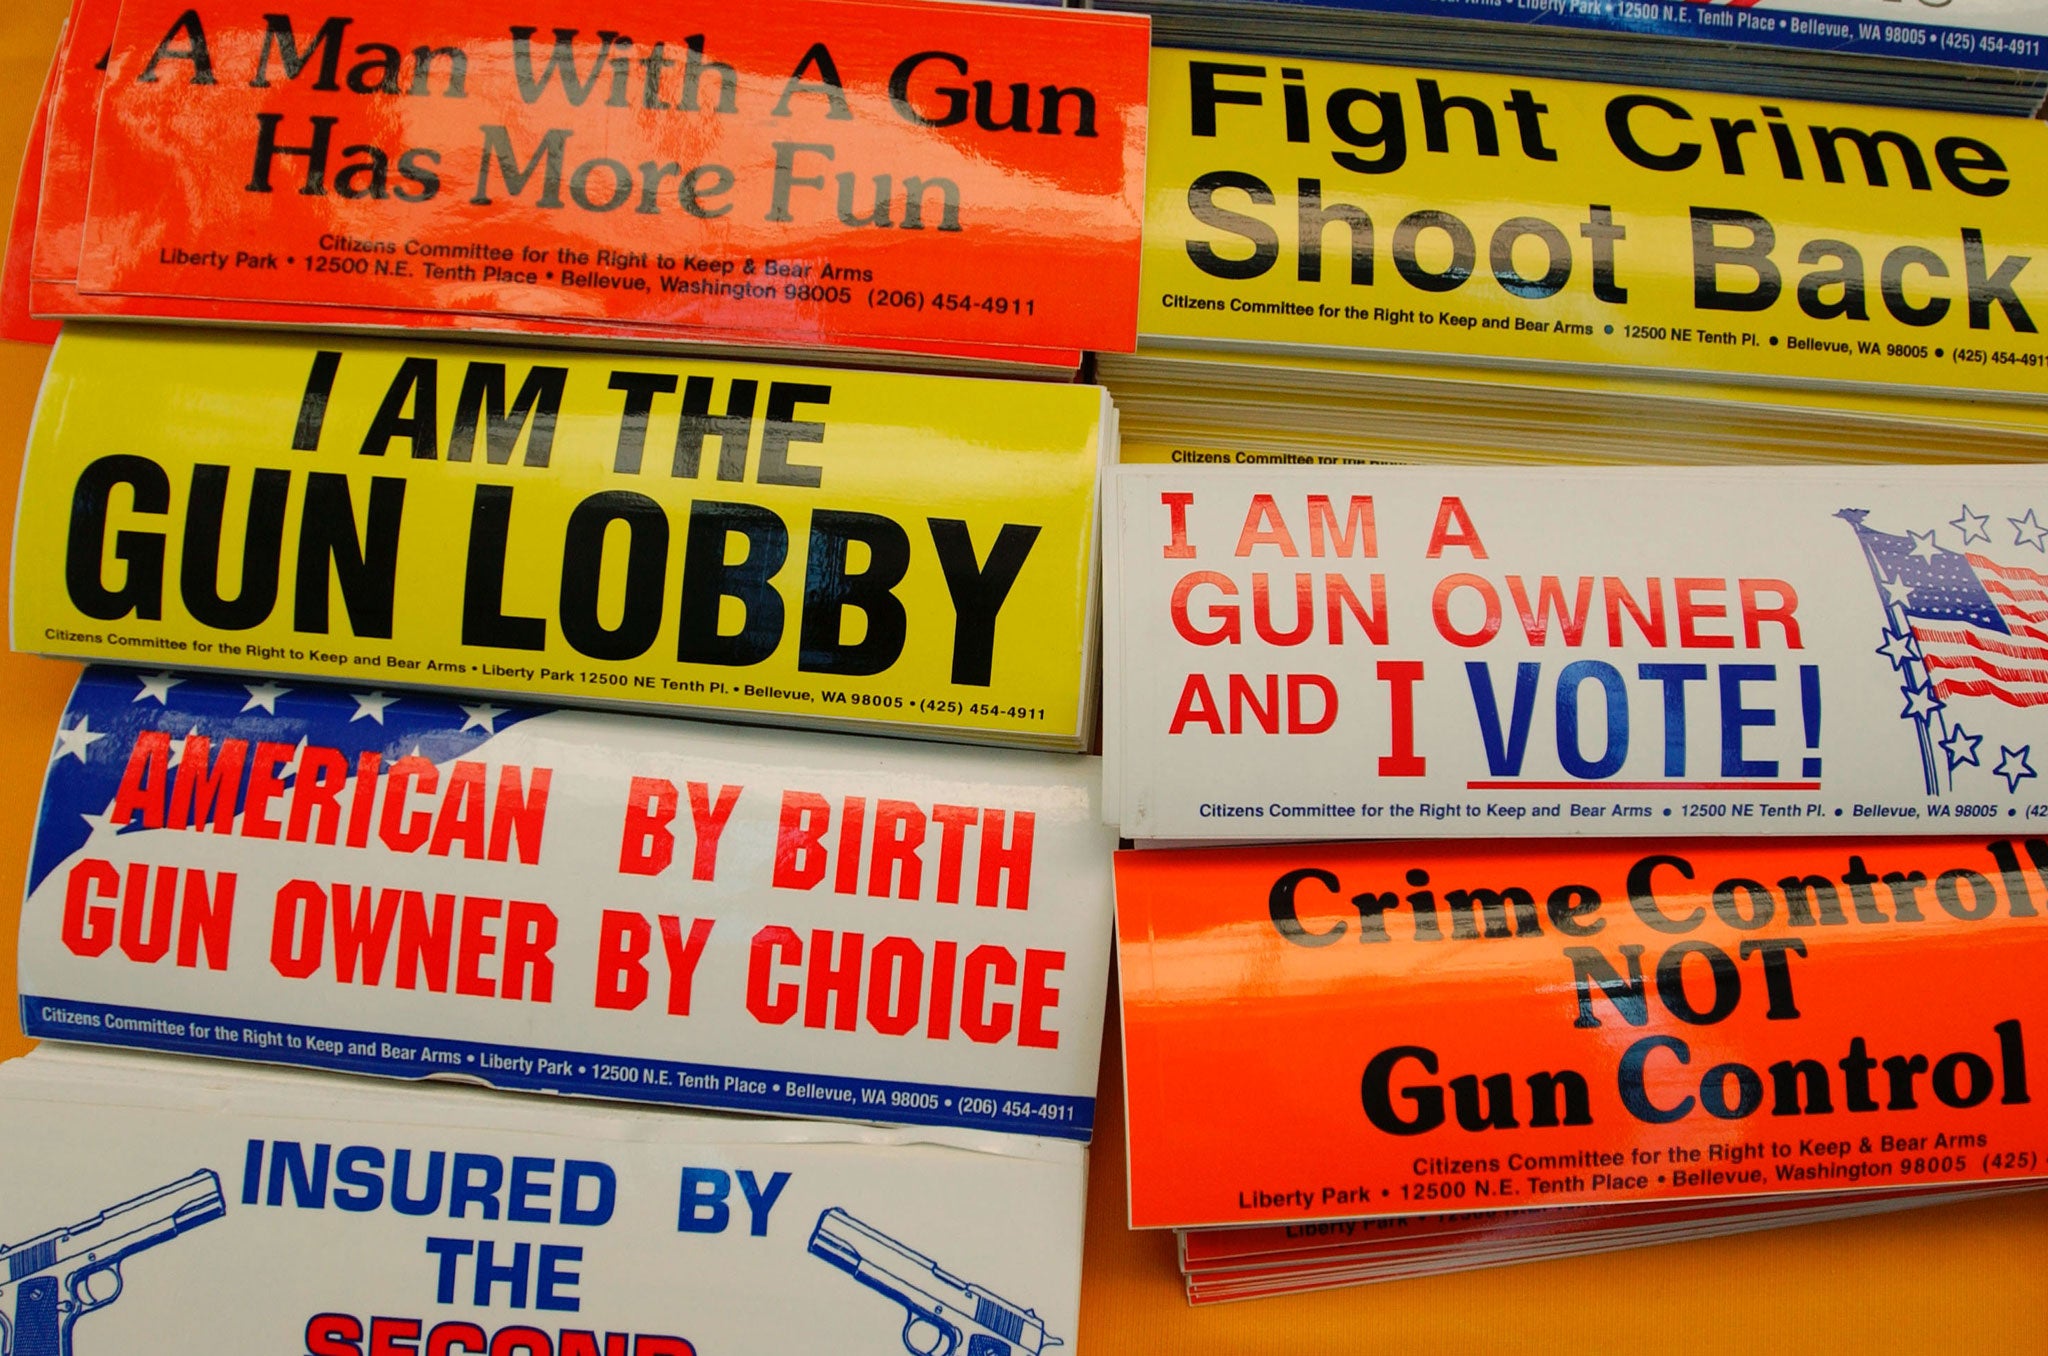 Bumper stickers hang for sale at the Second Amendment Foundation booth before the 133rd Annual NRA Convention at the David L. Lawrence Convention Center April 15, 2004 in Pittsburgh, Pennsylvania.